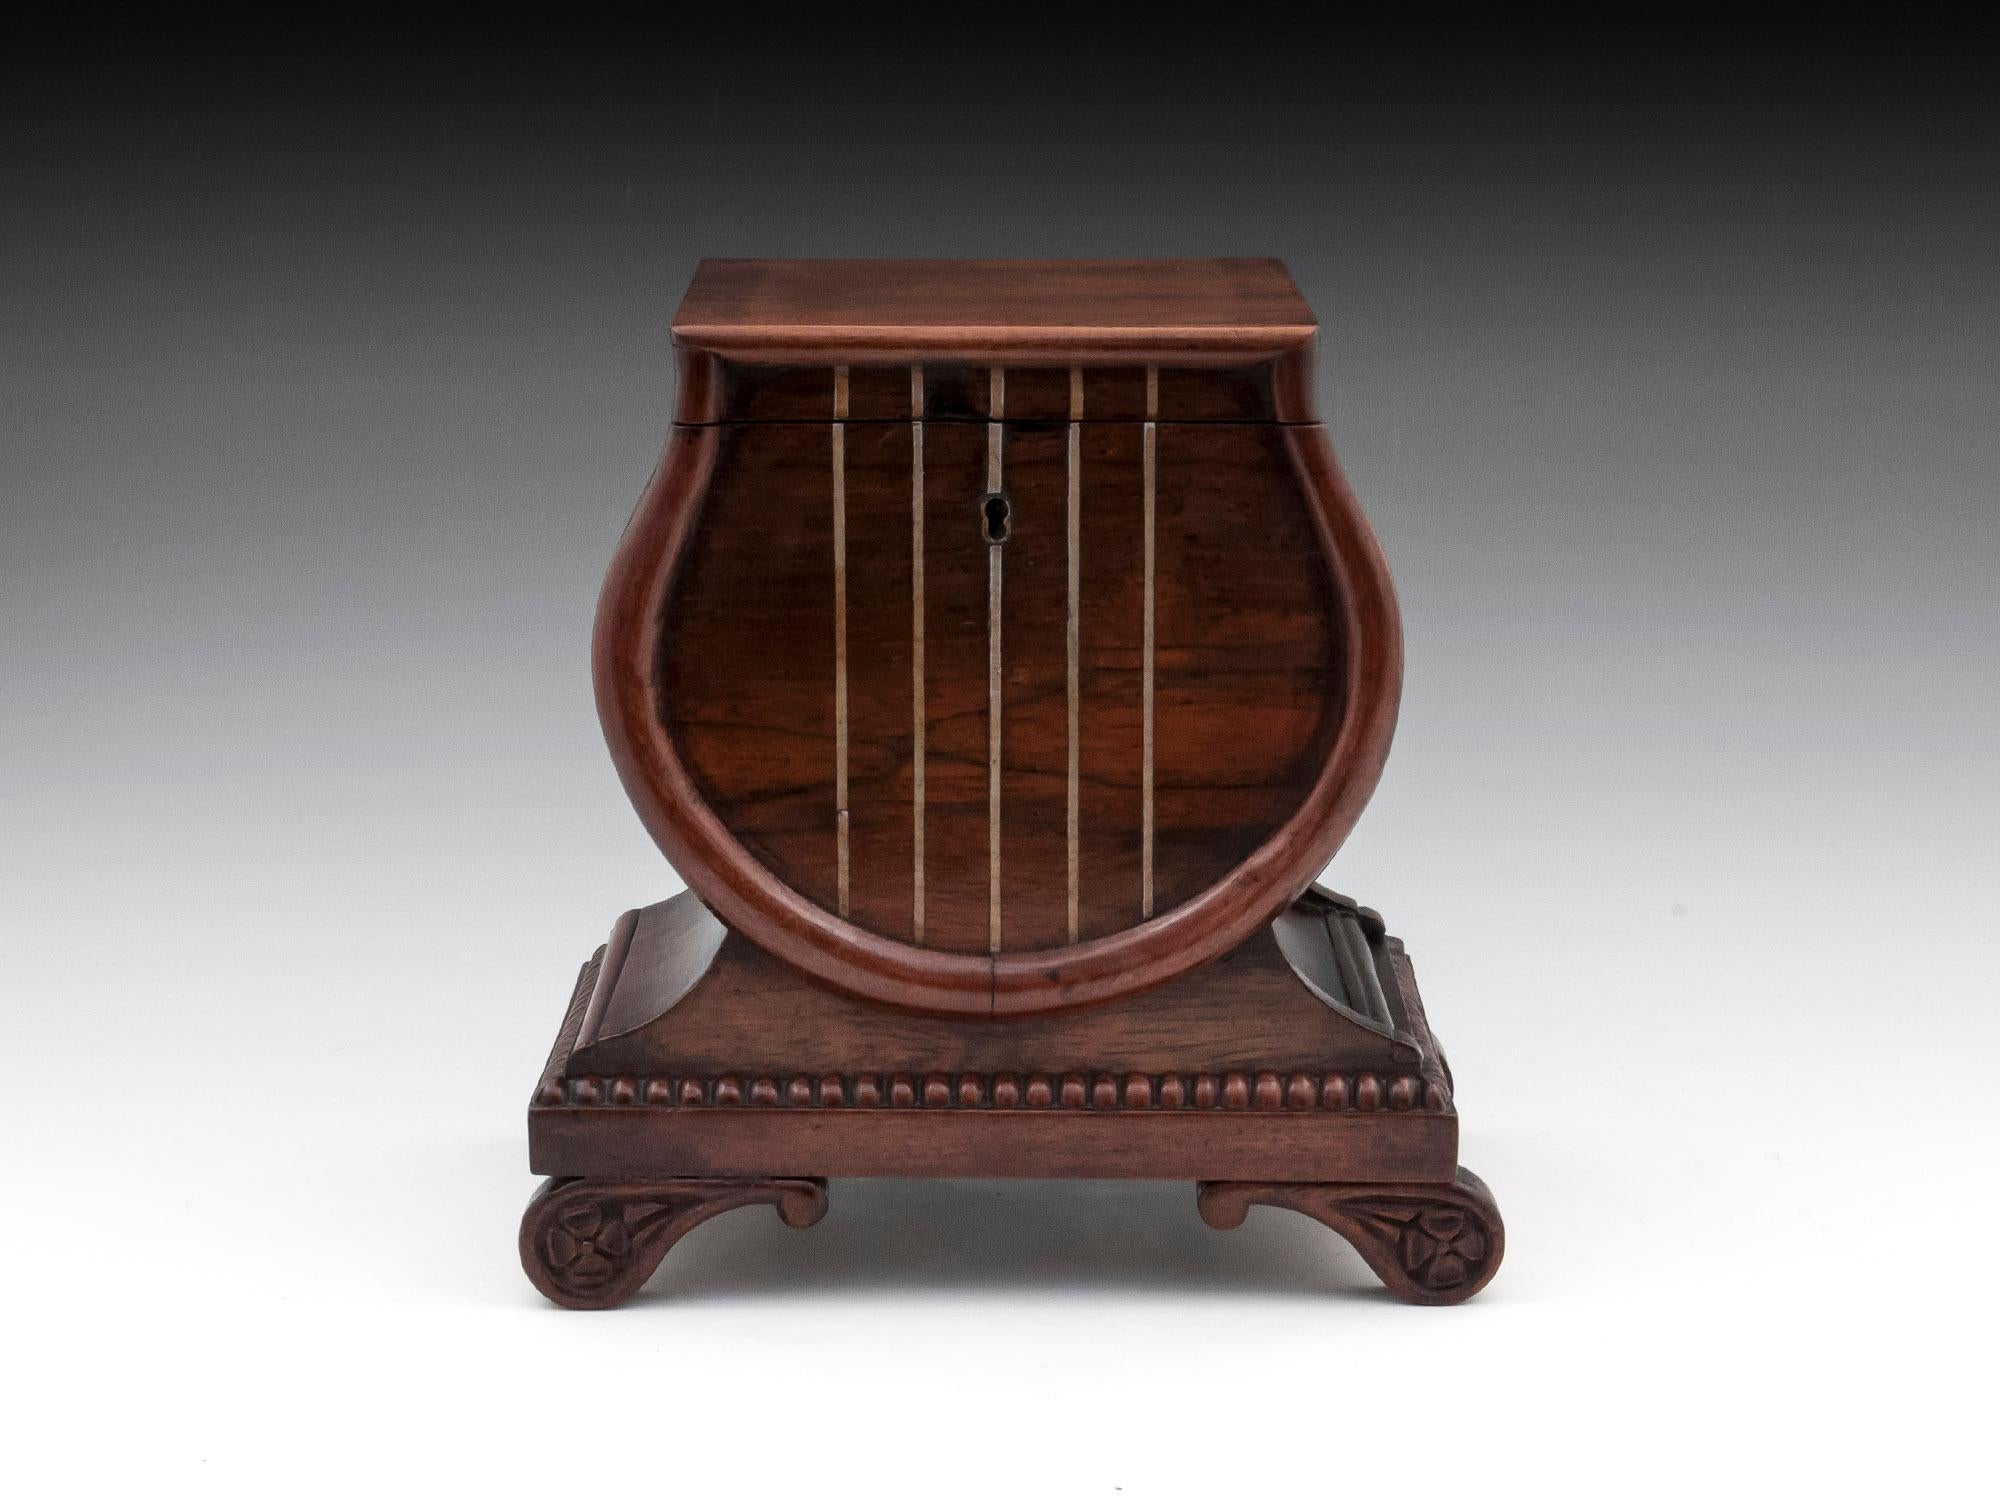 Unusual mahogany tea caddy in the form of a lyre with pewter strings.
The plinth base has a secret spoon drawer and stands on ornate, shaped feet.

The interior of this lyre tea caddy has a single rosewood lid covering two-foil lined